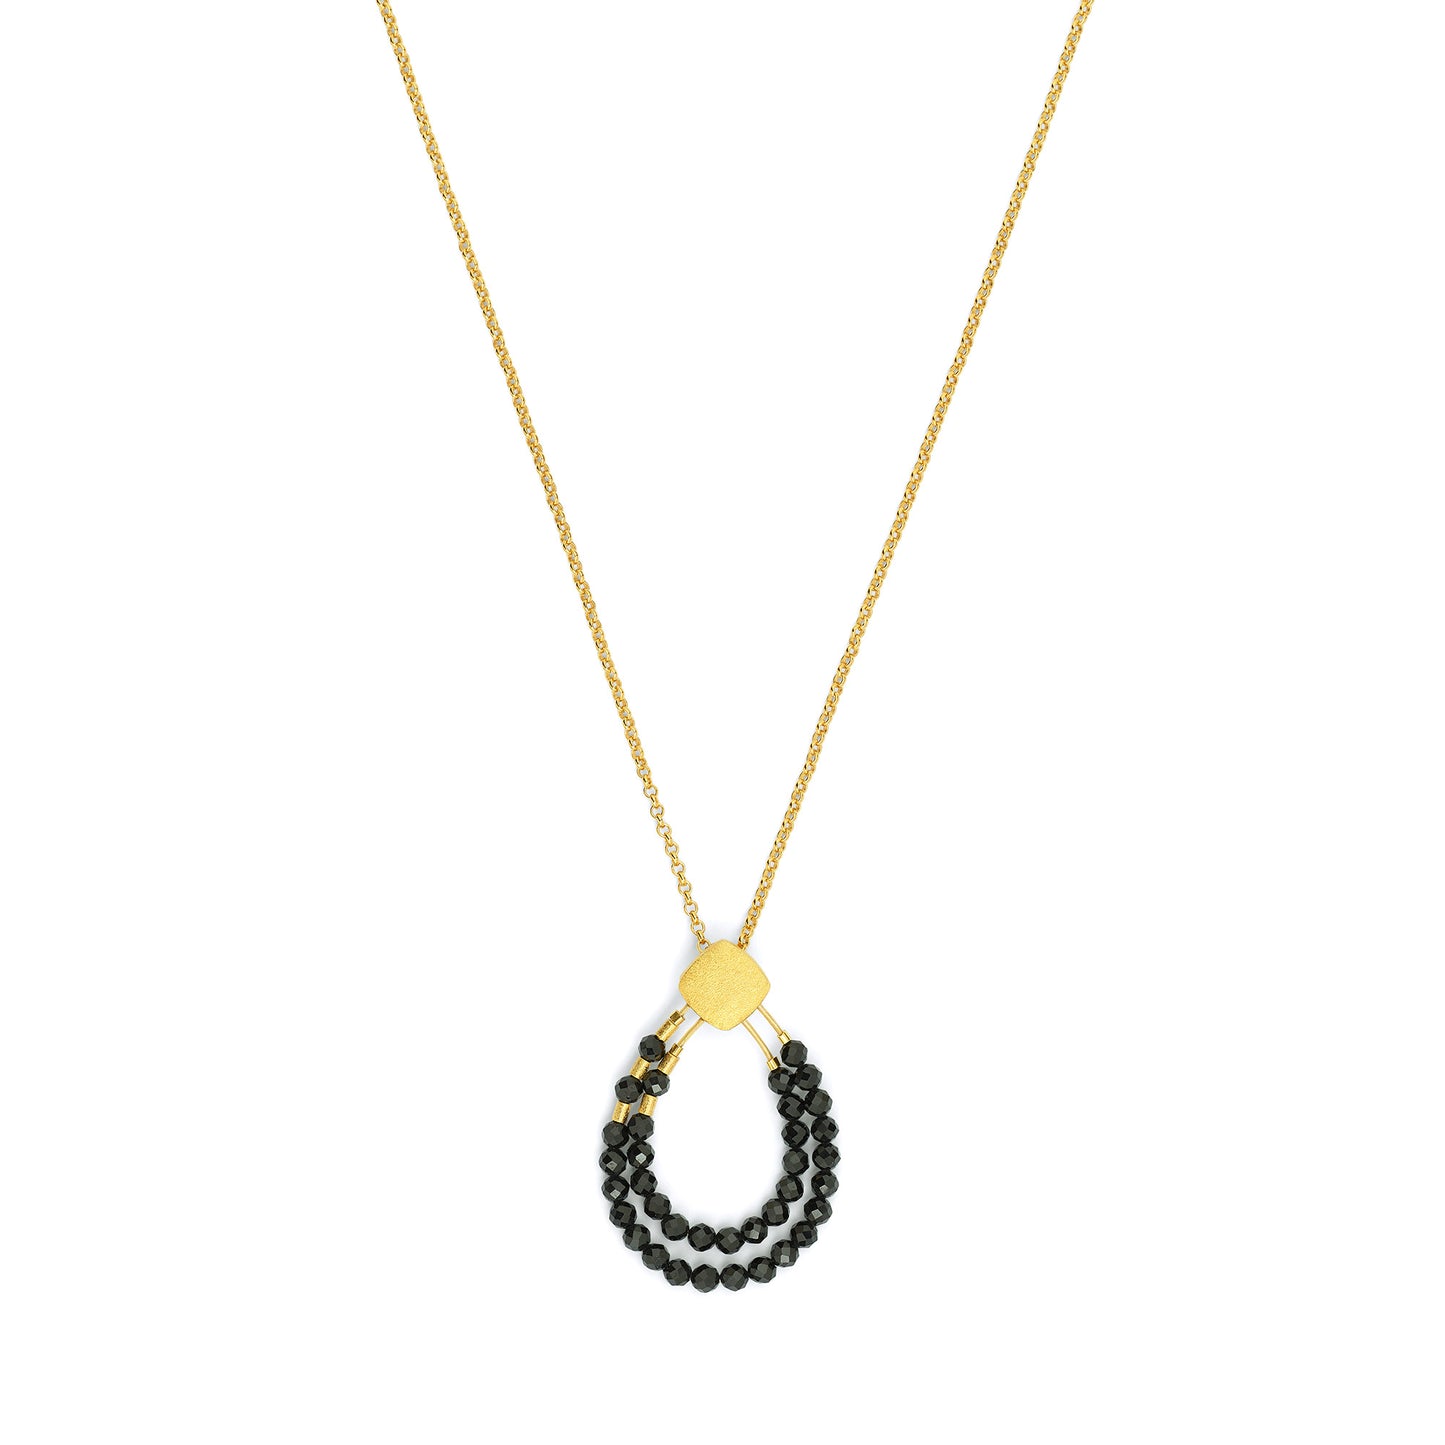 Bernd Wolf Collection "Clini" Black Spinel Necklace